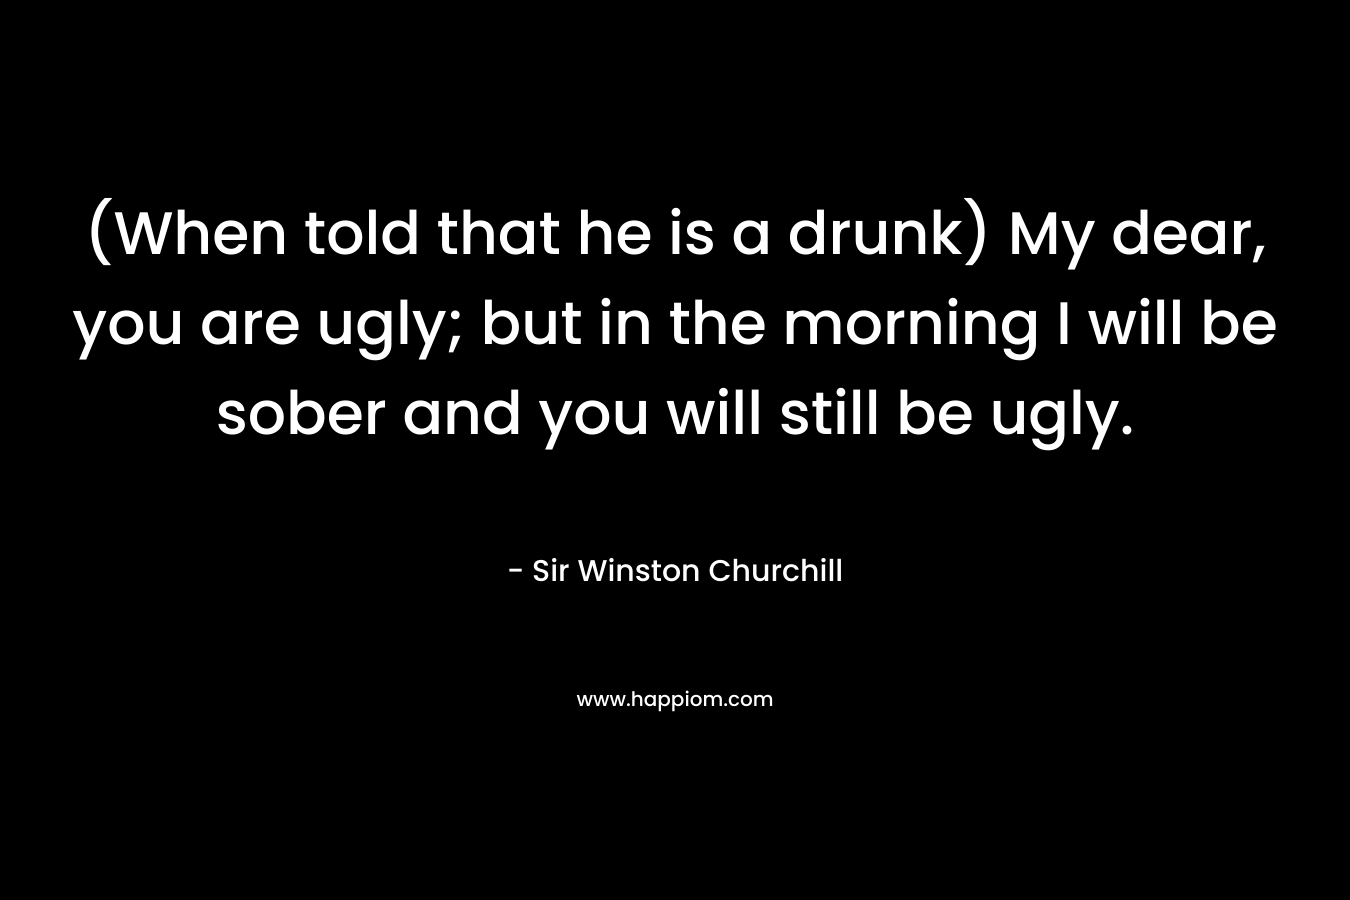 (When told that he is a drunk) My dear, you are ugly; but in the morning I will be sober and you will still be ugly. – Sir Winston Churchill